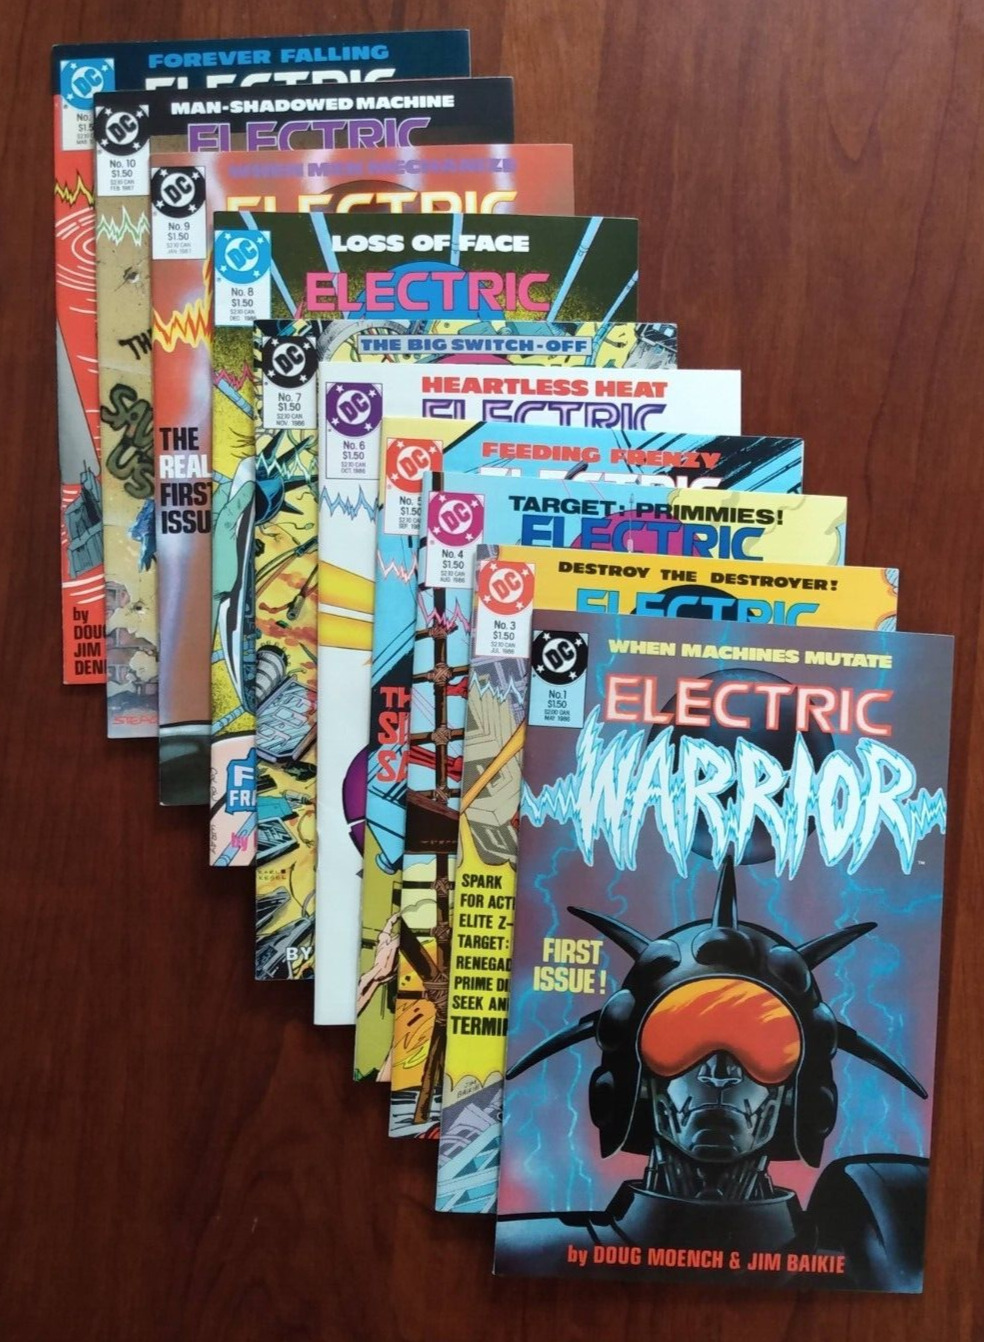 Electric Warrior (1986) #1 - 11 (missing #2) - 1st appearance - NM